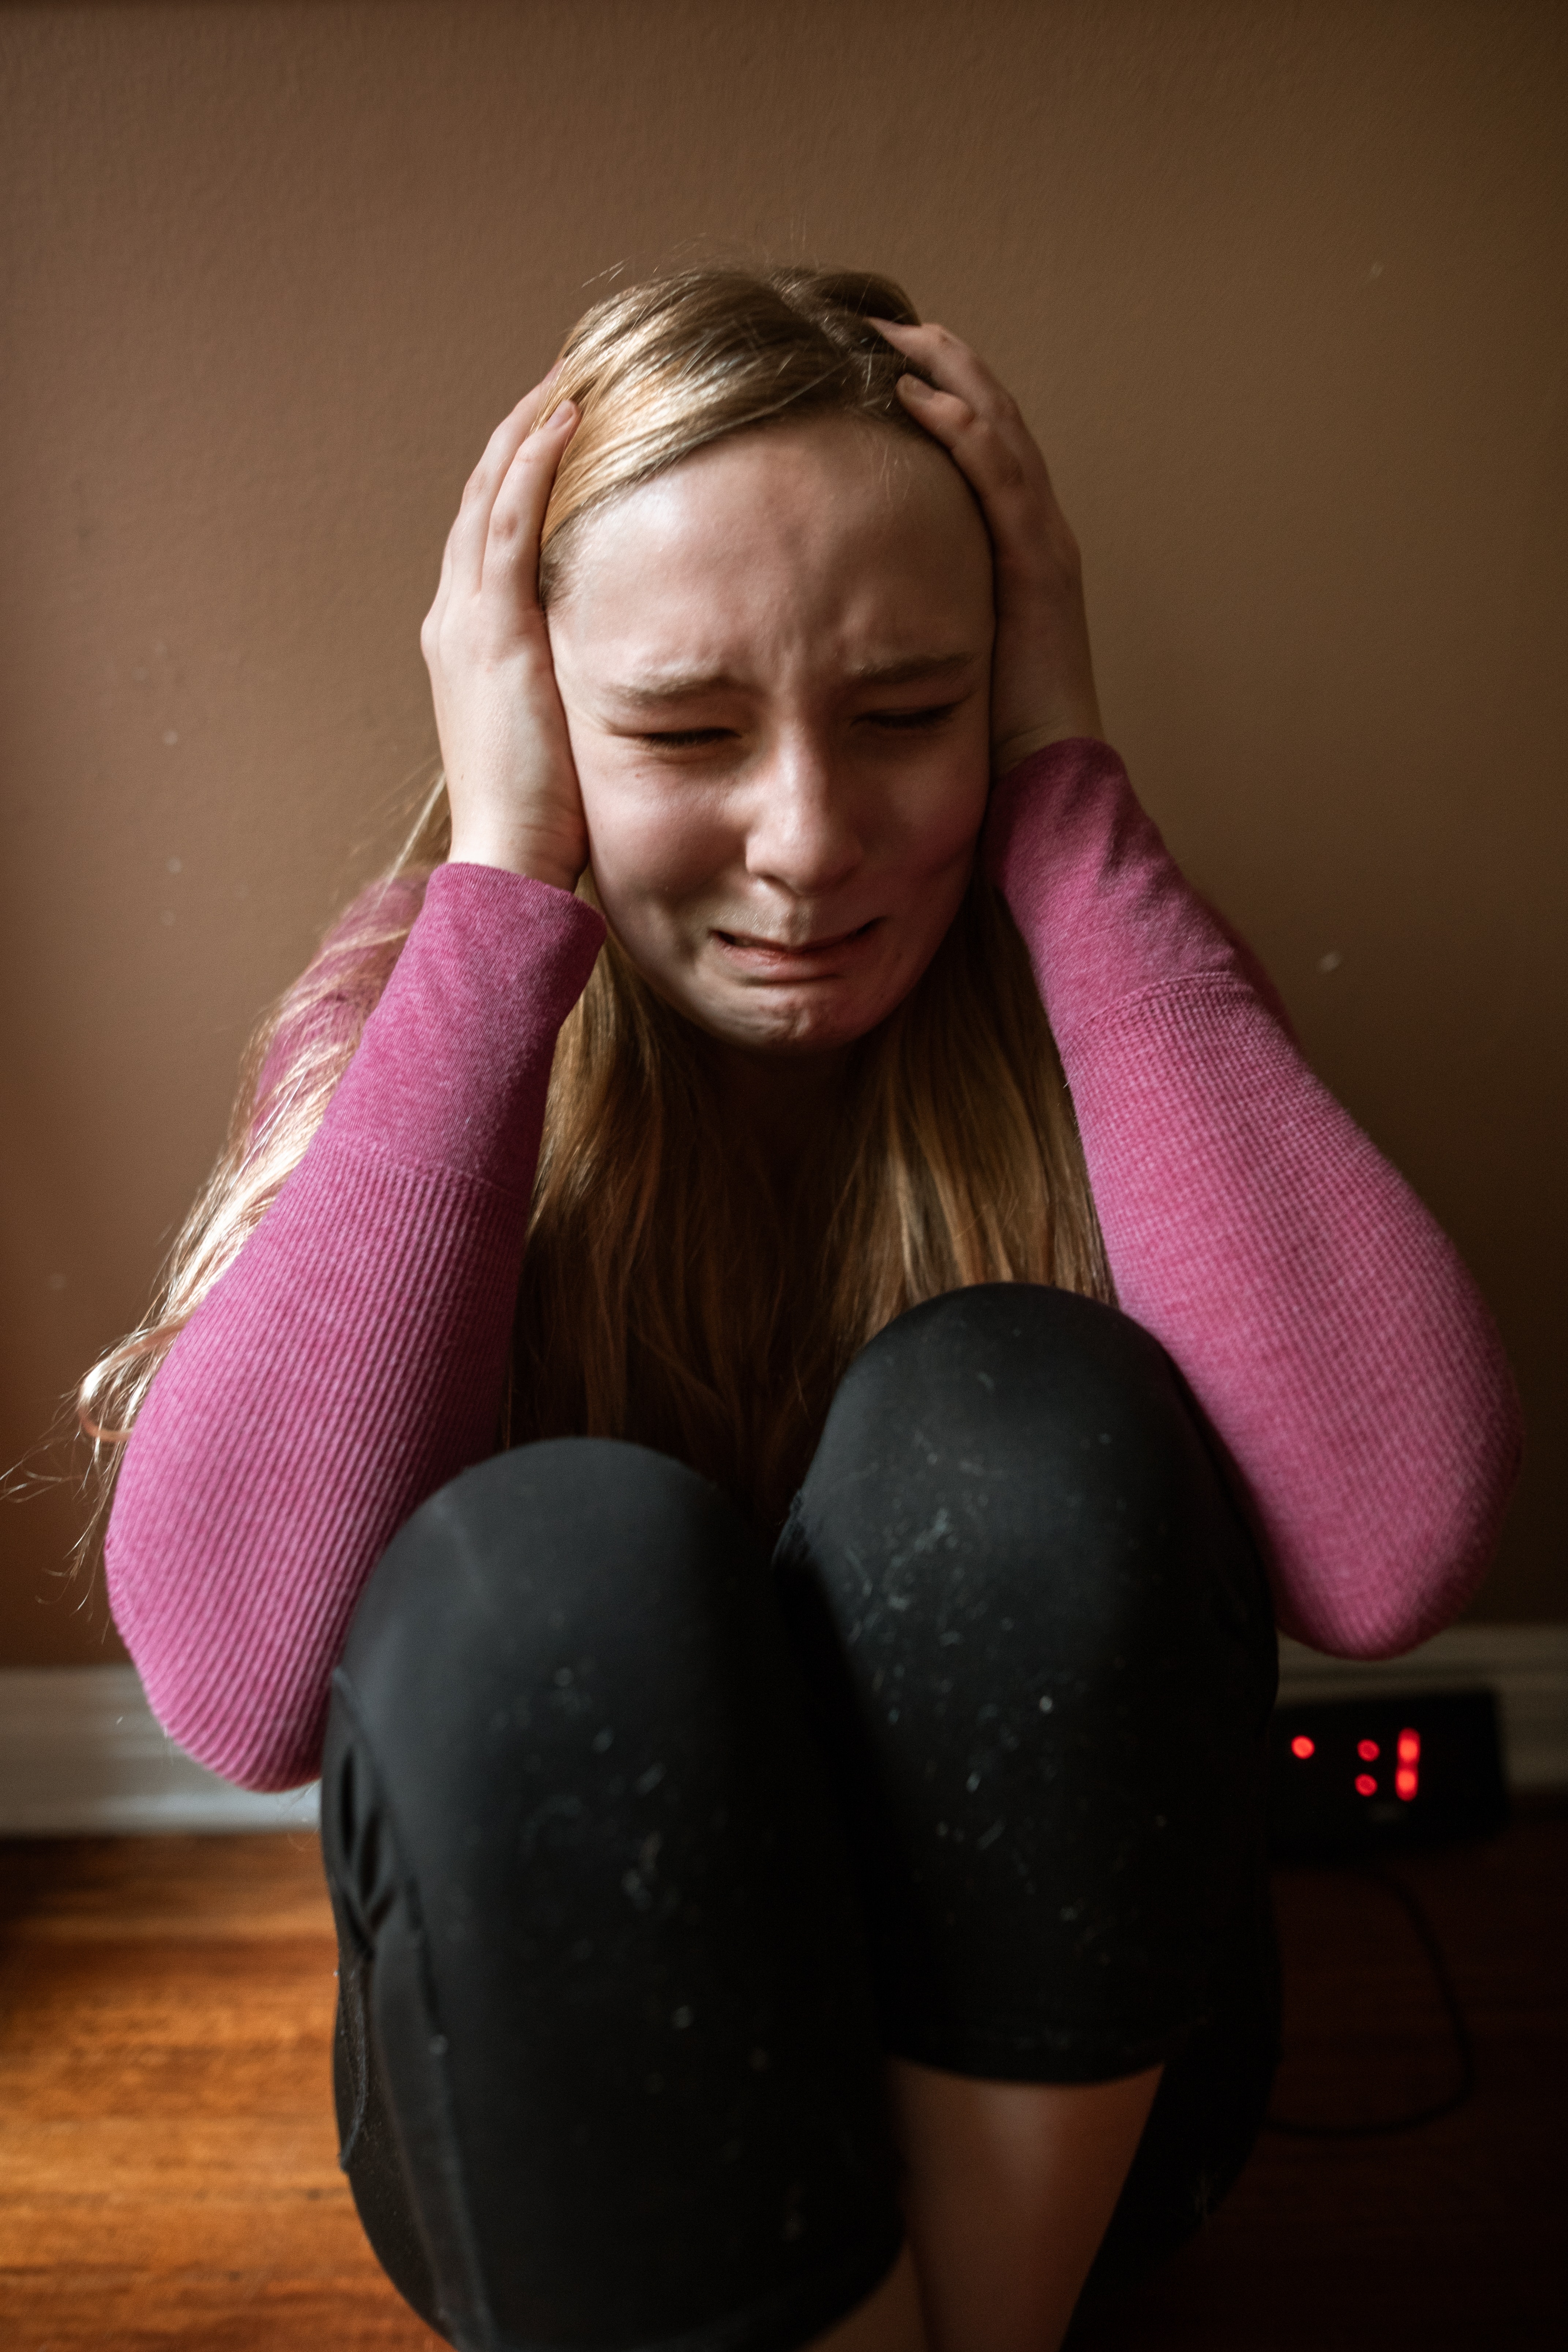 Anxiety, panic disorder, and depression can make it difficult for a teen to function in school.